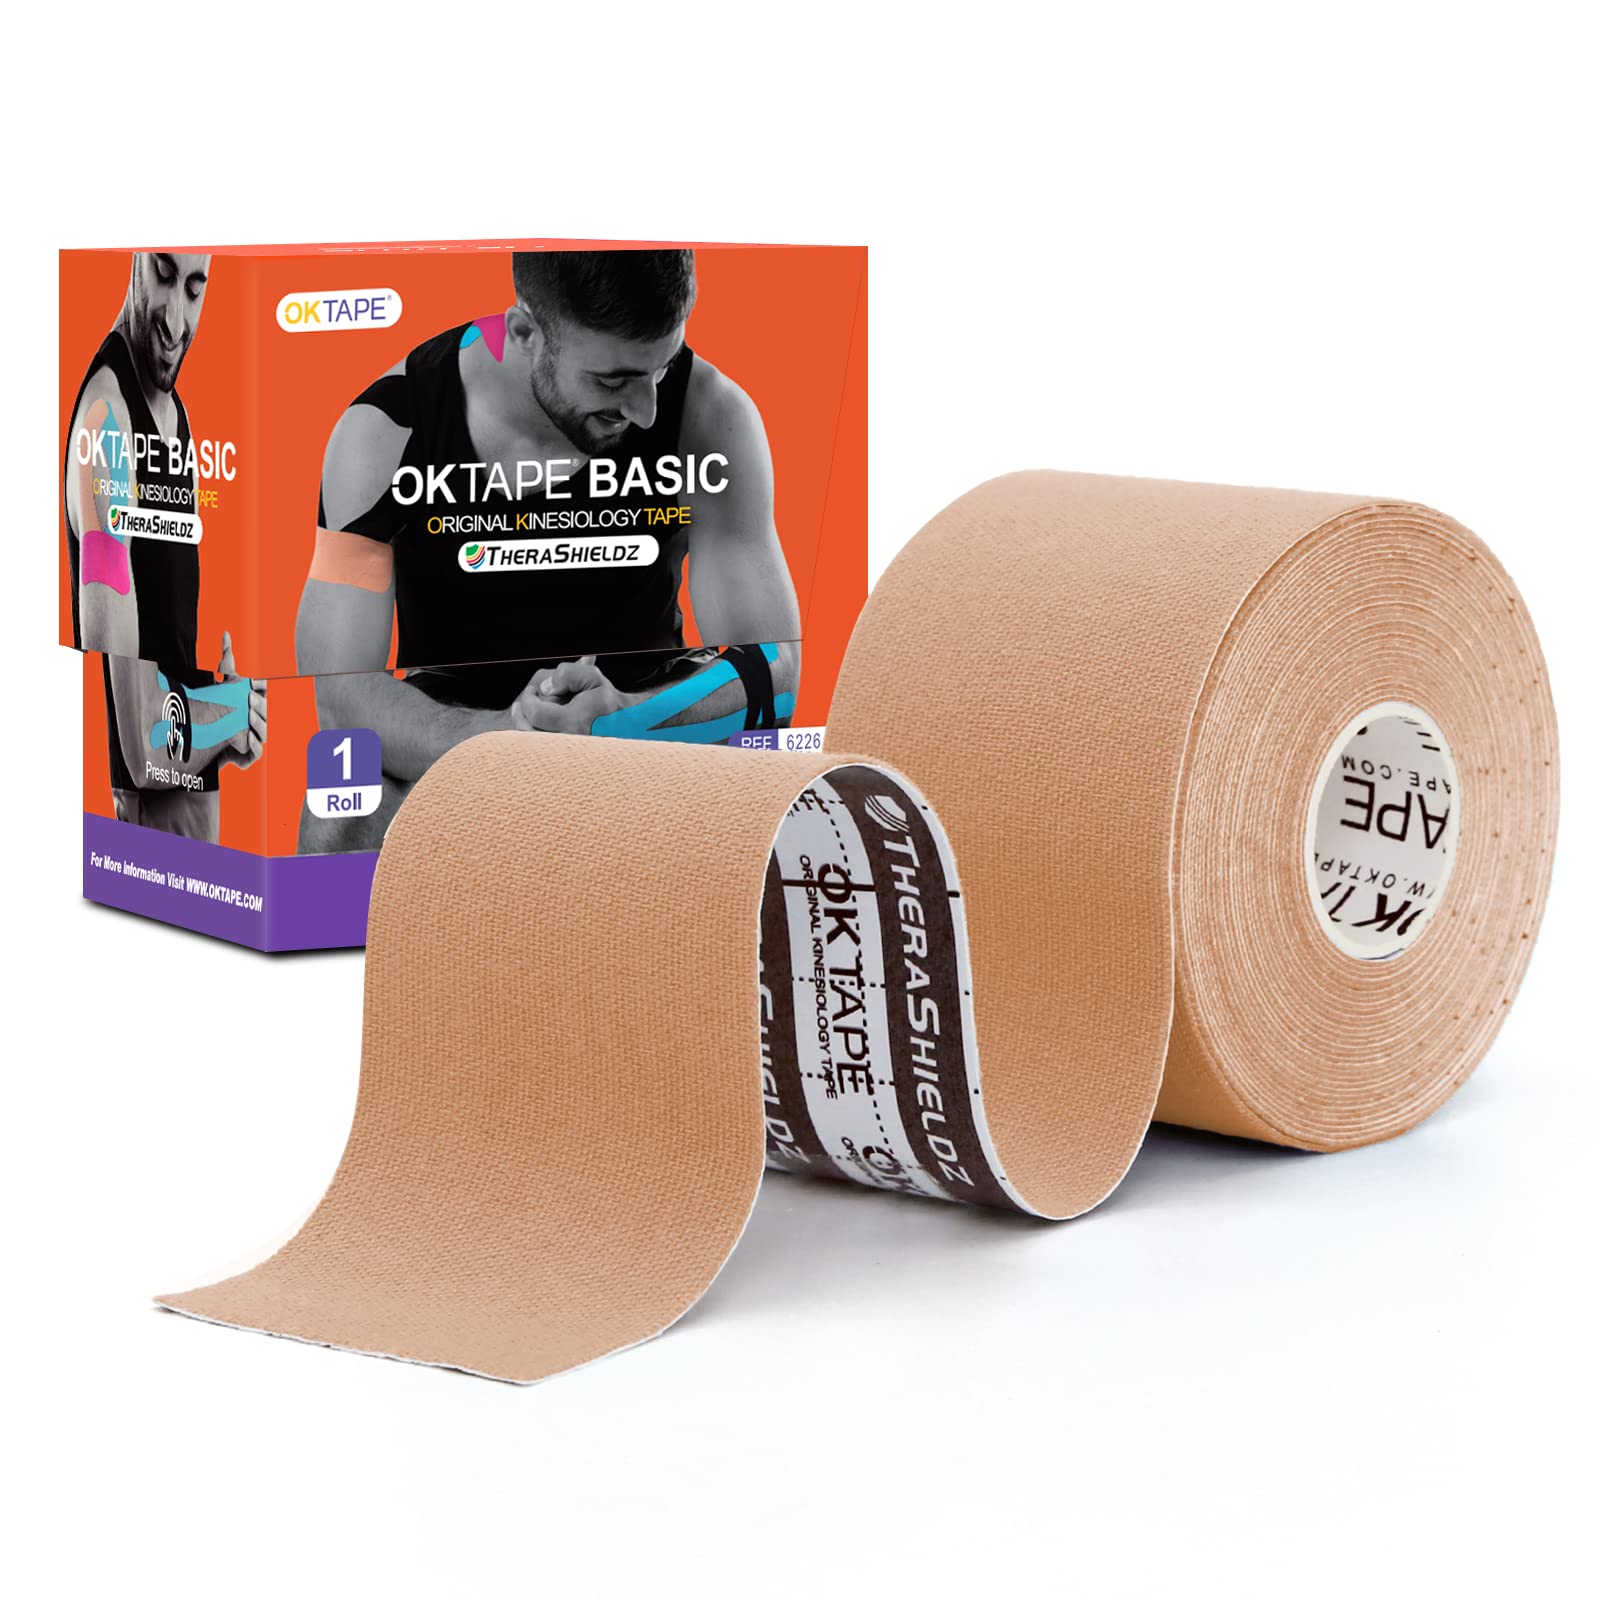 OK TAPE Kinesiology Tape, Basic Original Cotton Elastic Athletic Tape for  Support and Recovery, Sports Tape Therapeutic Pain Relief, 2in16.4ft Uncut  Roll - Beige 1 Roll Beige